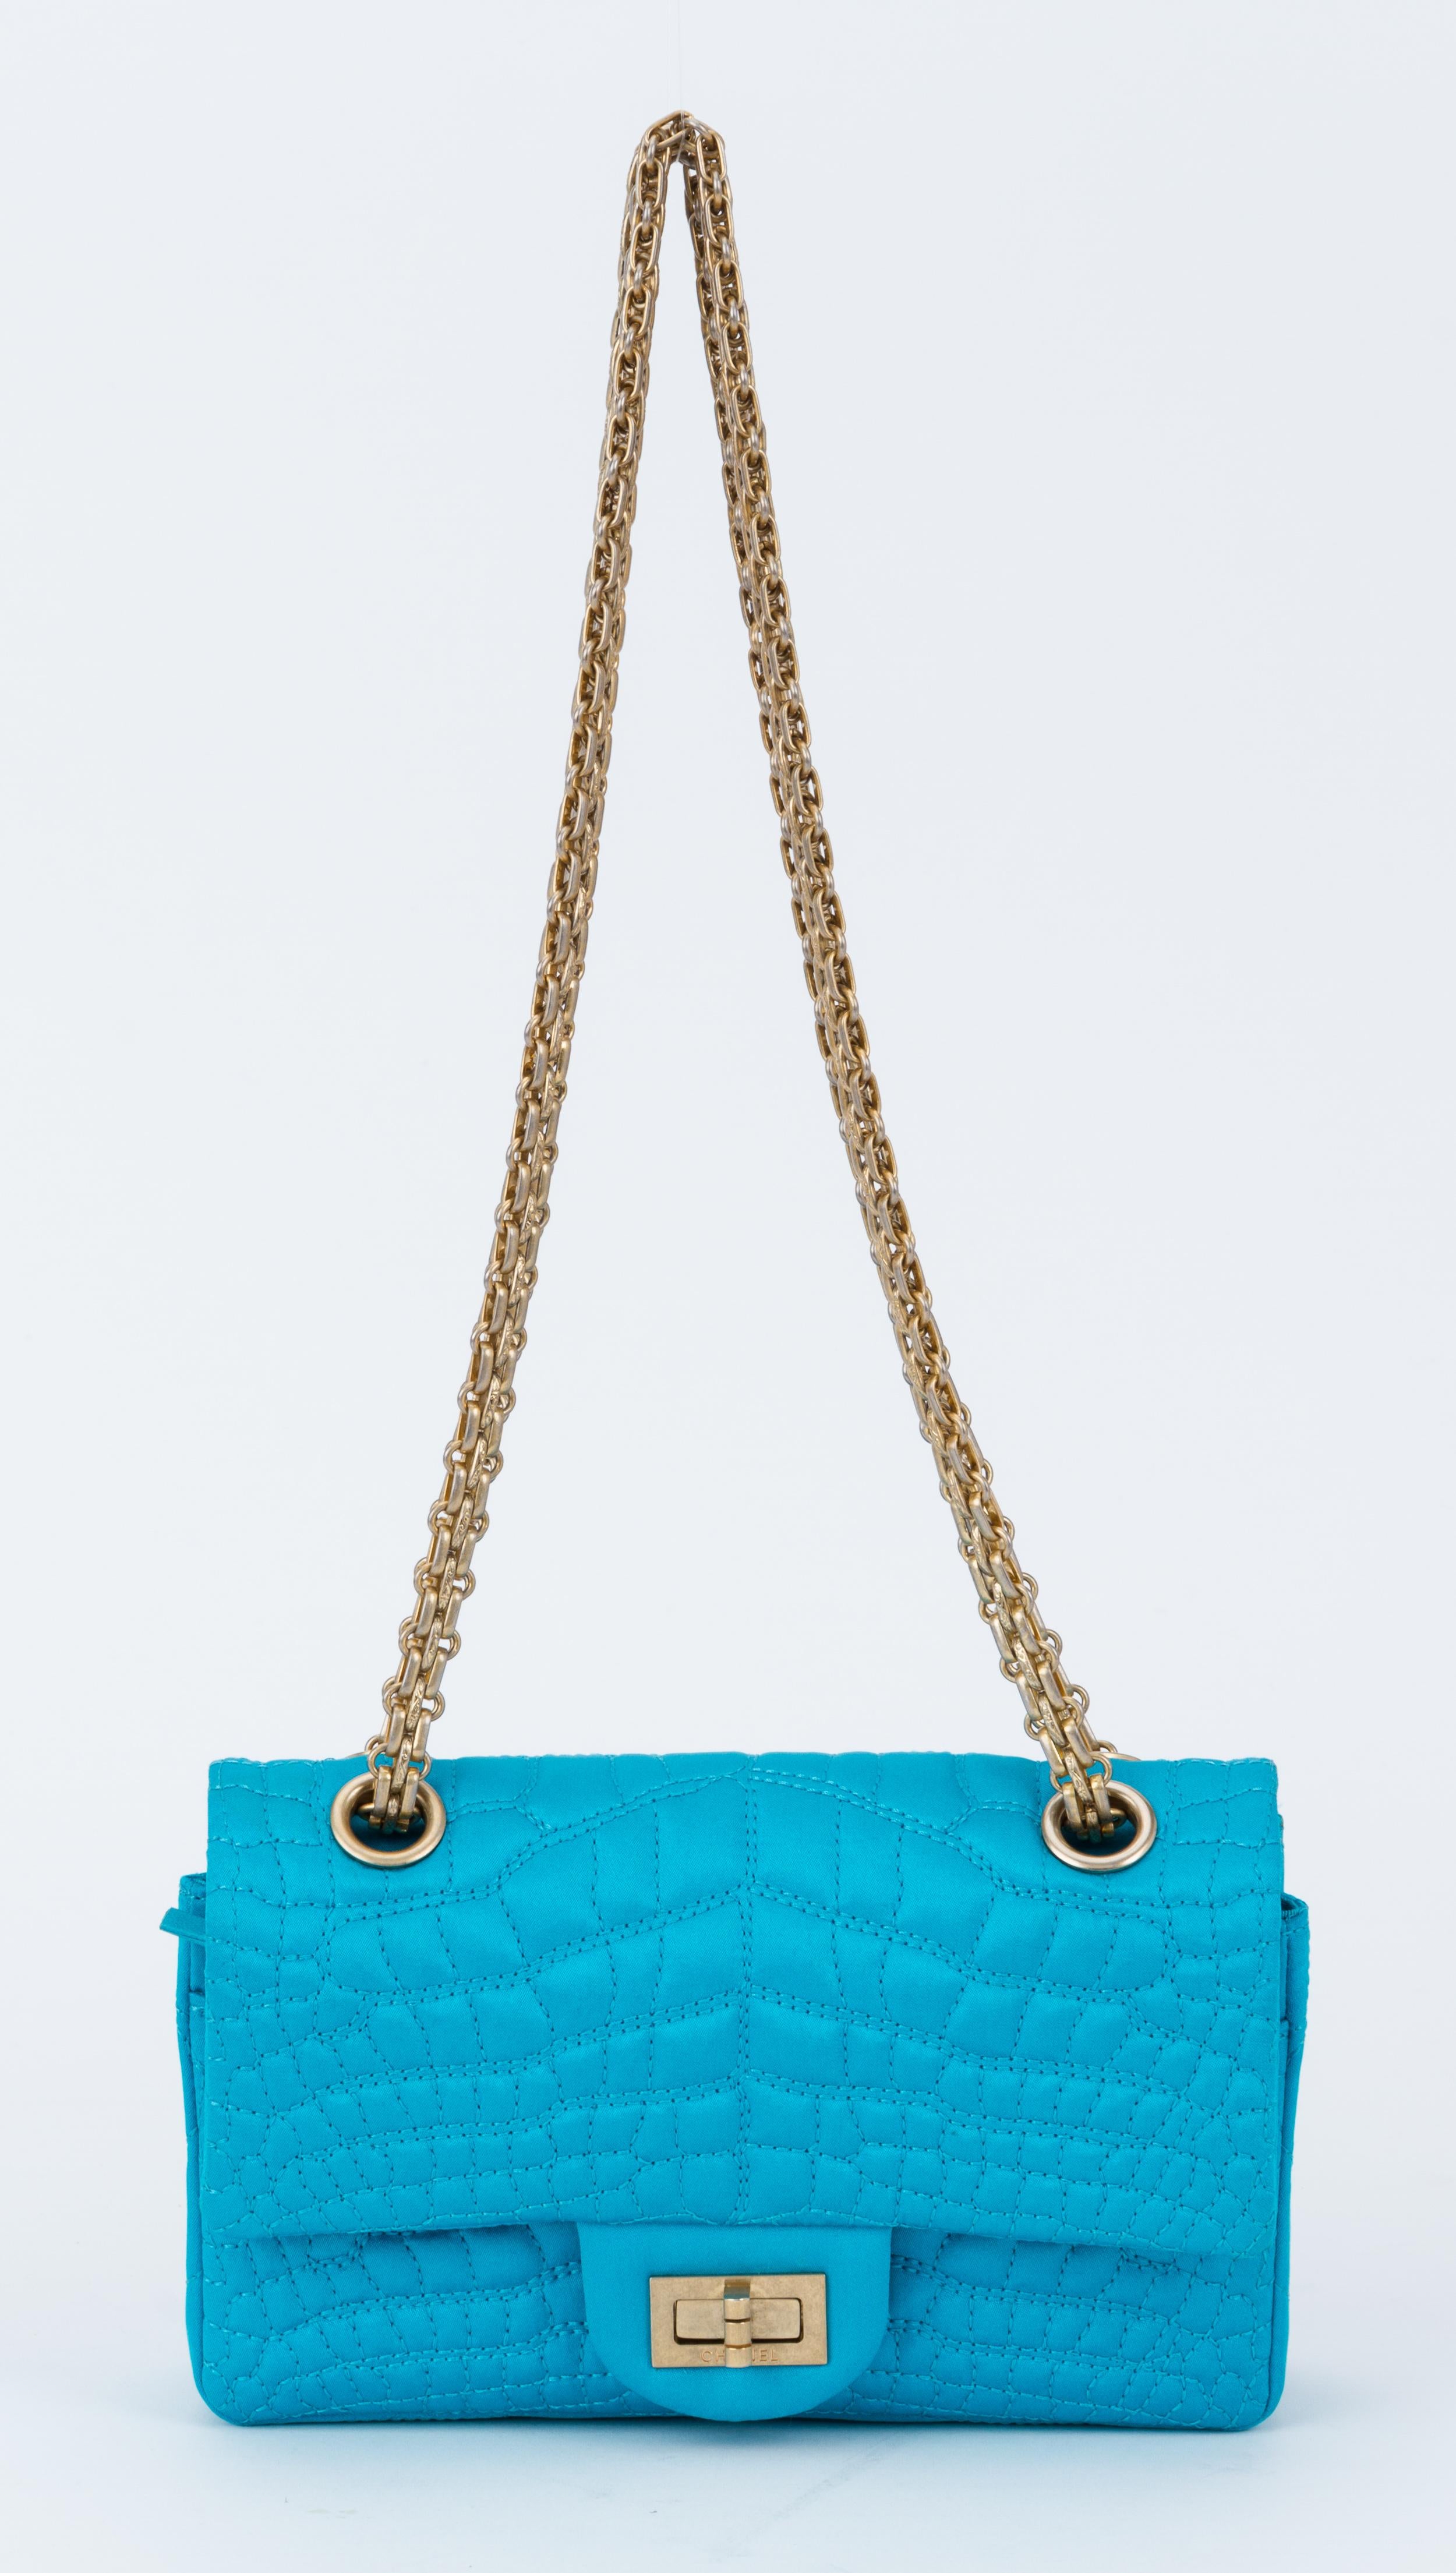 Chanel Silk Croc Embossed Turquoise Flap Bag 1